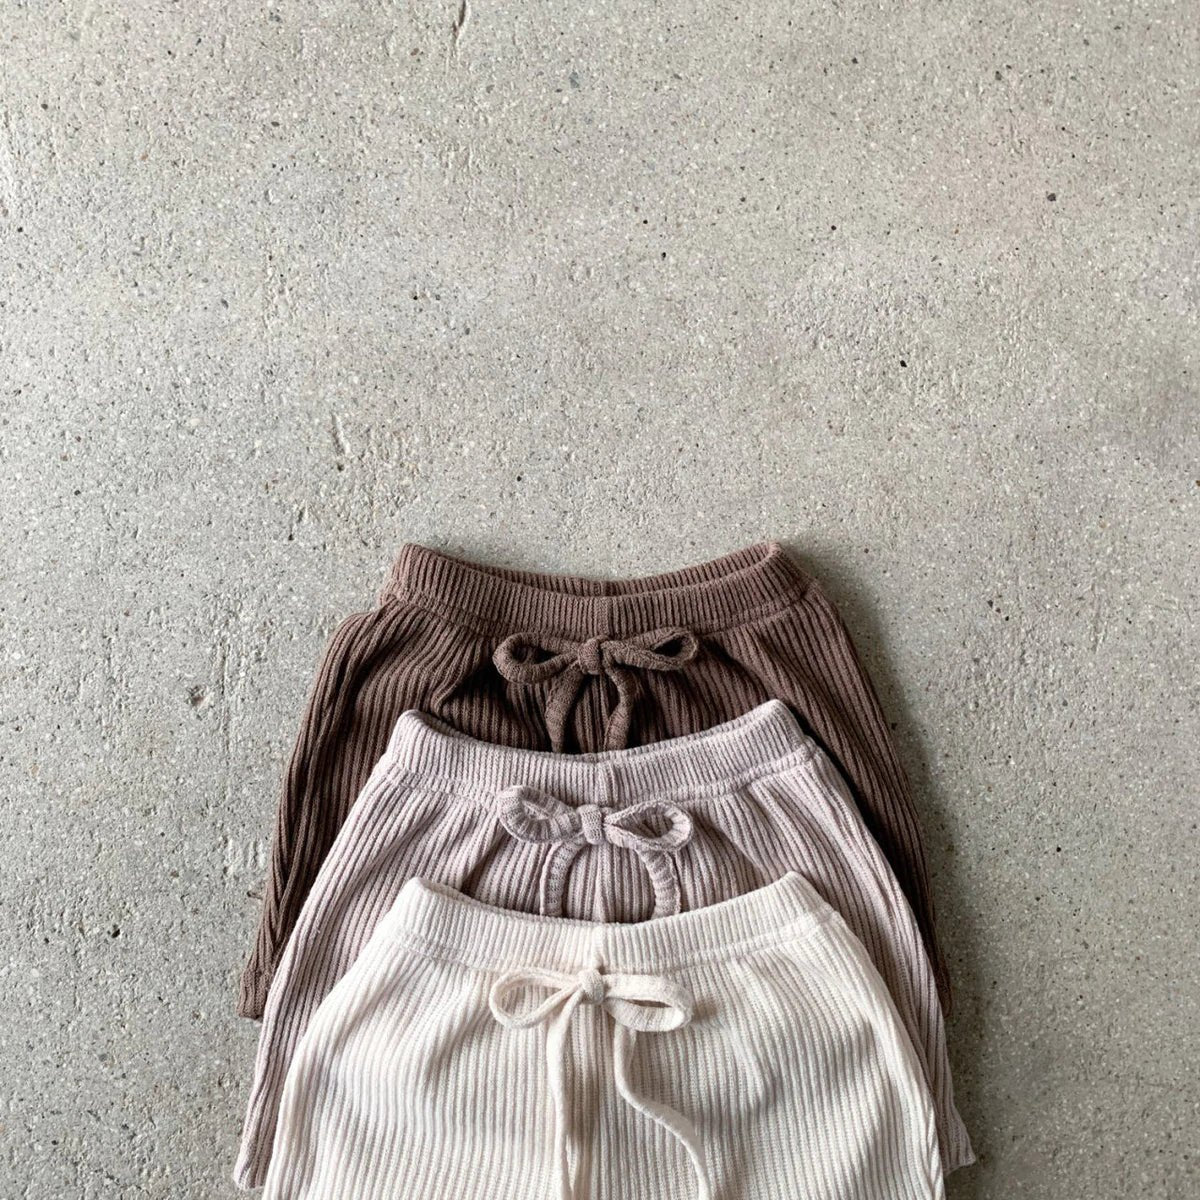 Butter Knit Shorts find Stylish Fashion for Little People- at Little Foxx Concept Store